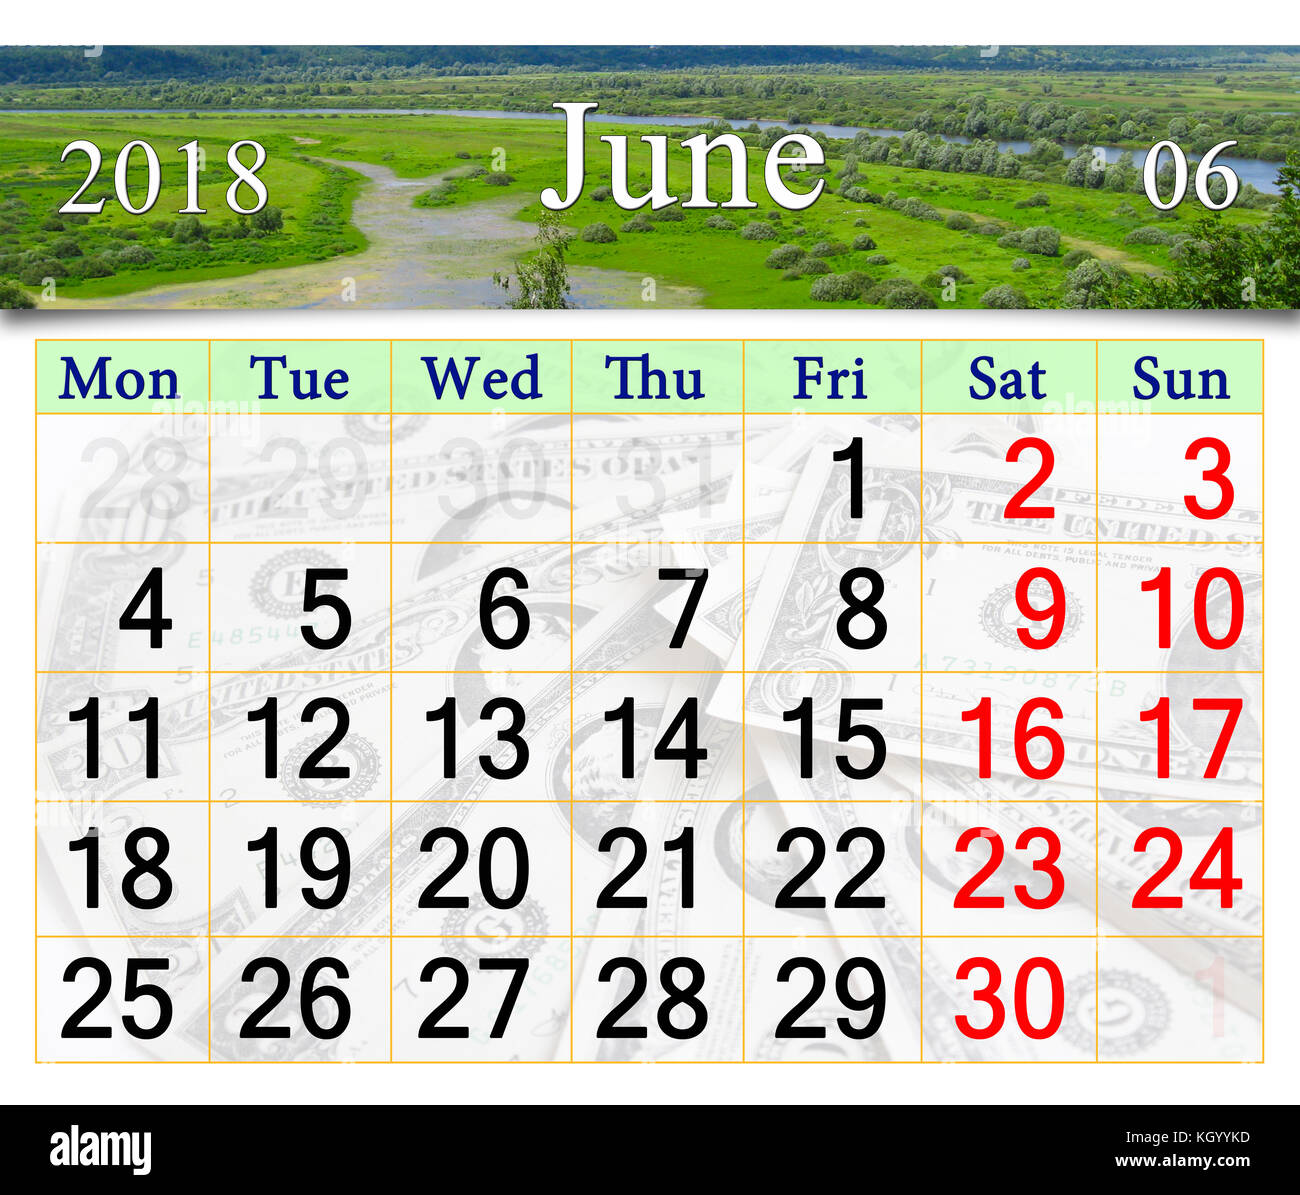 calendar-for-june-2018-with-landscapefrom-bird-s-eye-stock-photo-alamy